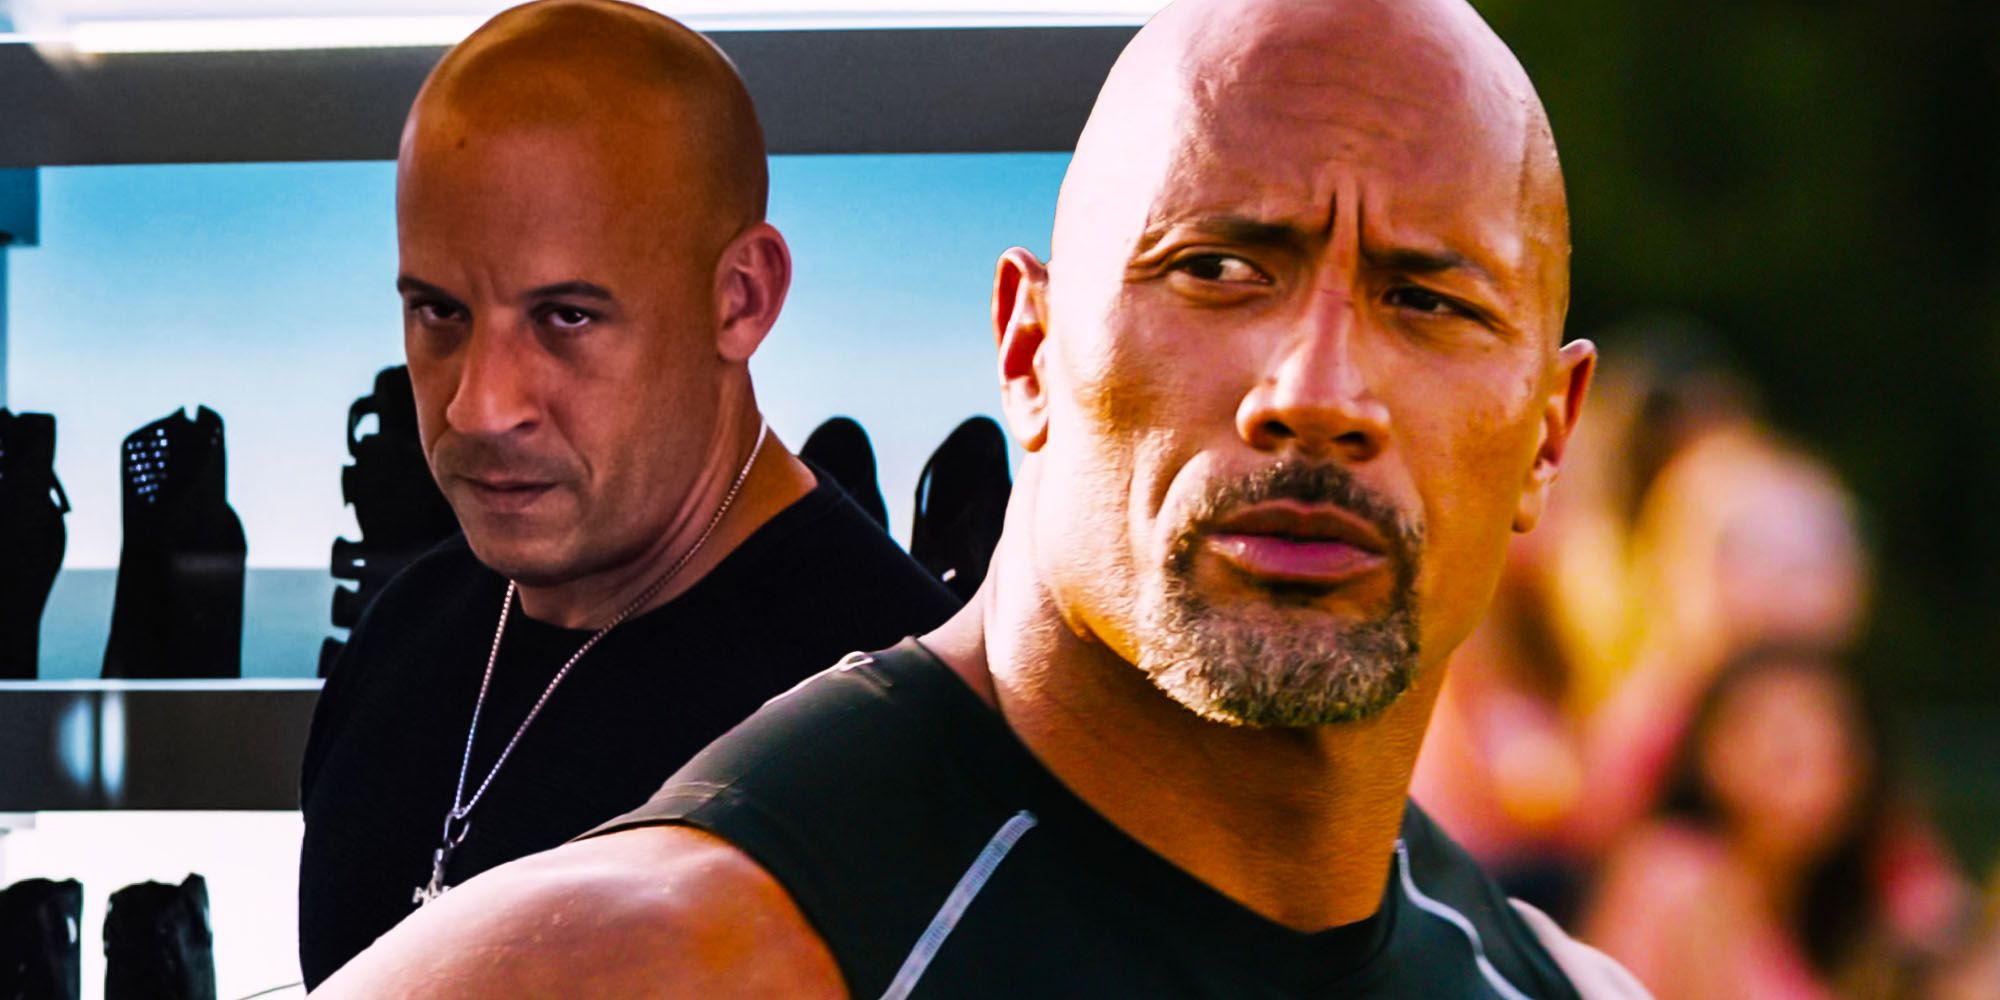 Fast and Furious fans celebrate F9 with Vin Diesel 'I got family